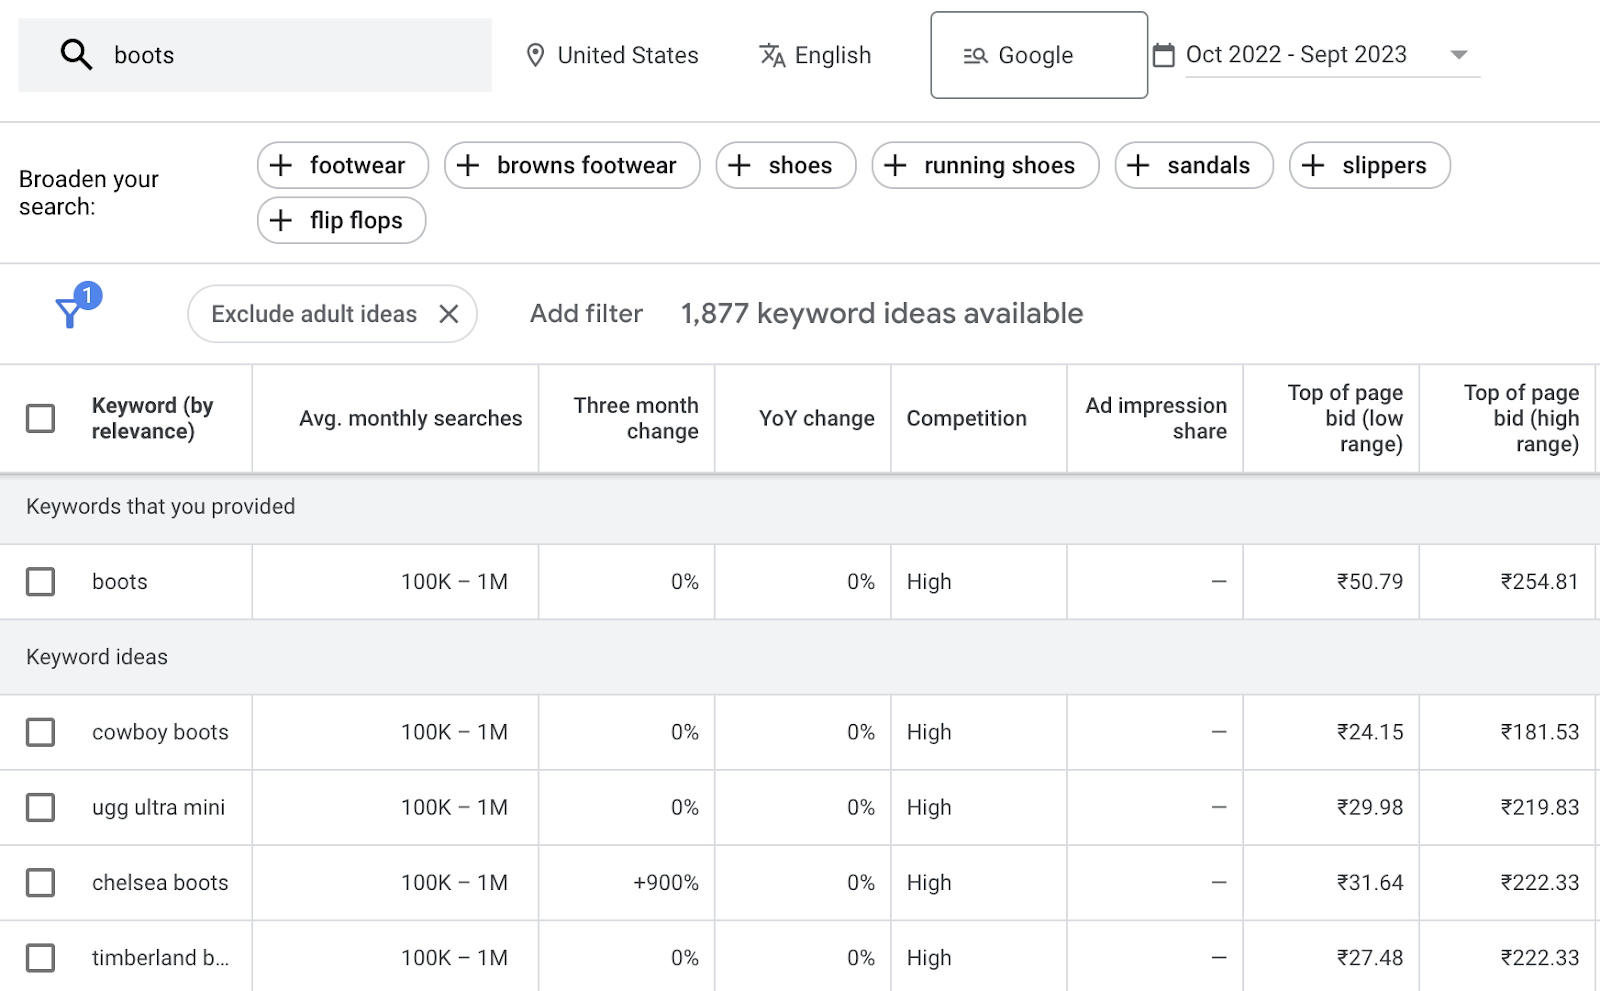 Google Keyword Planner results for "boots" keyword search